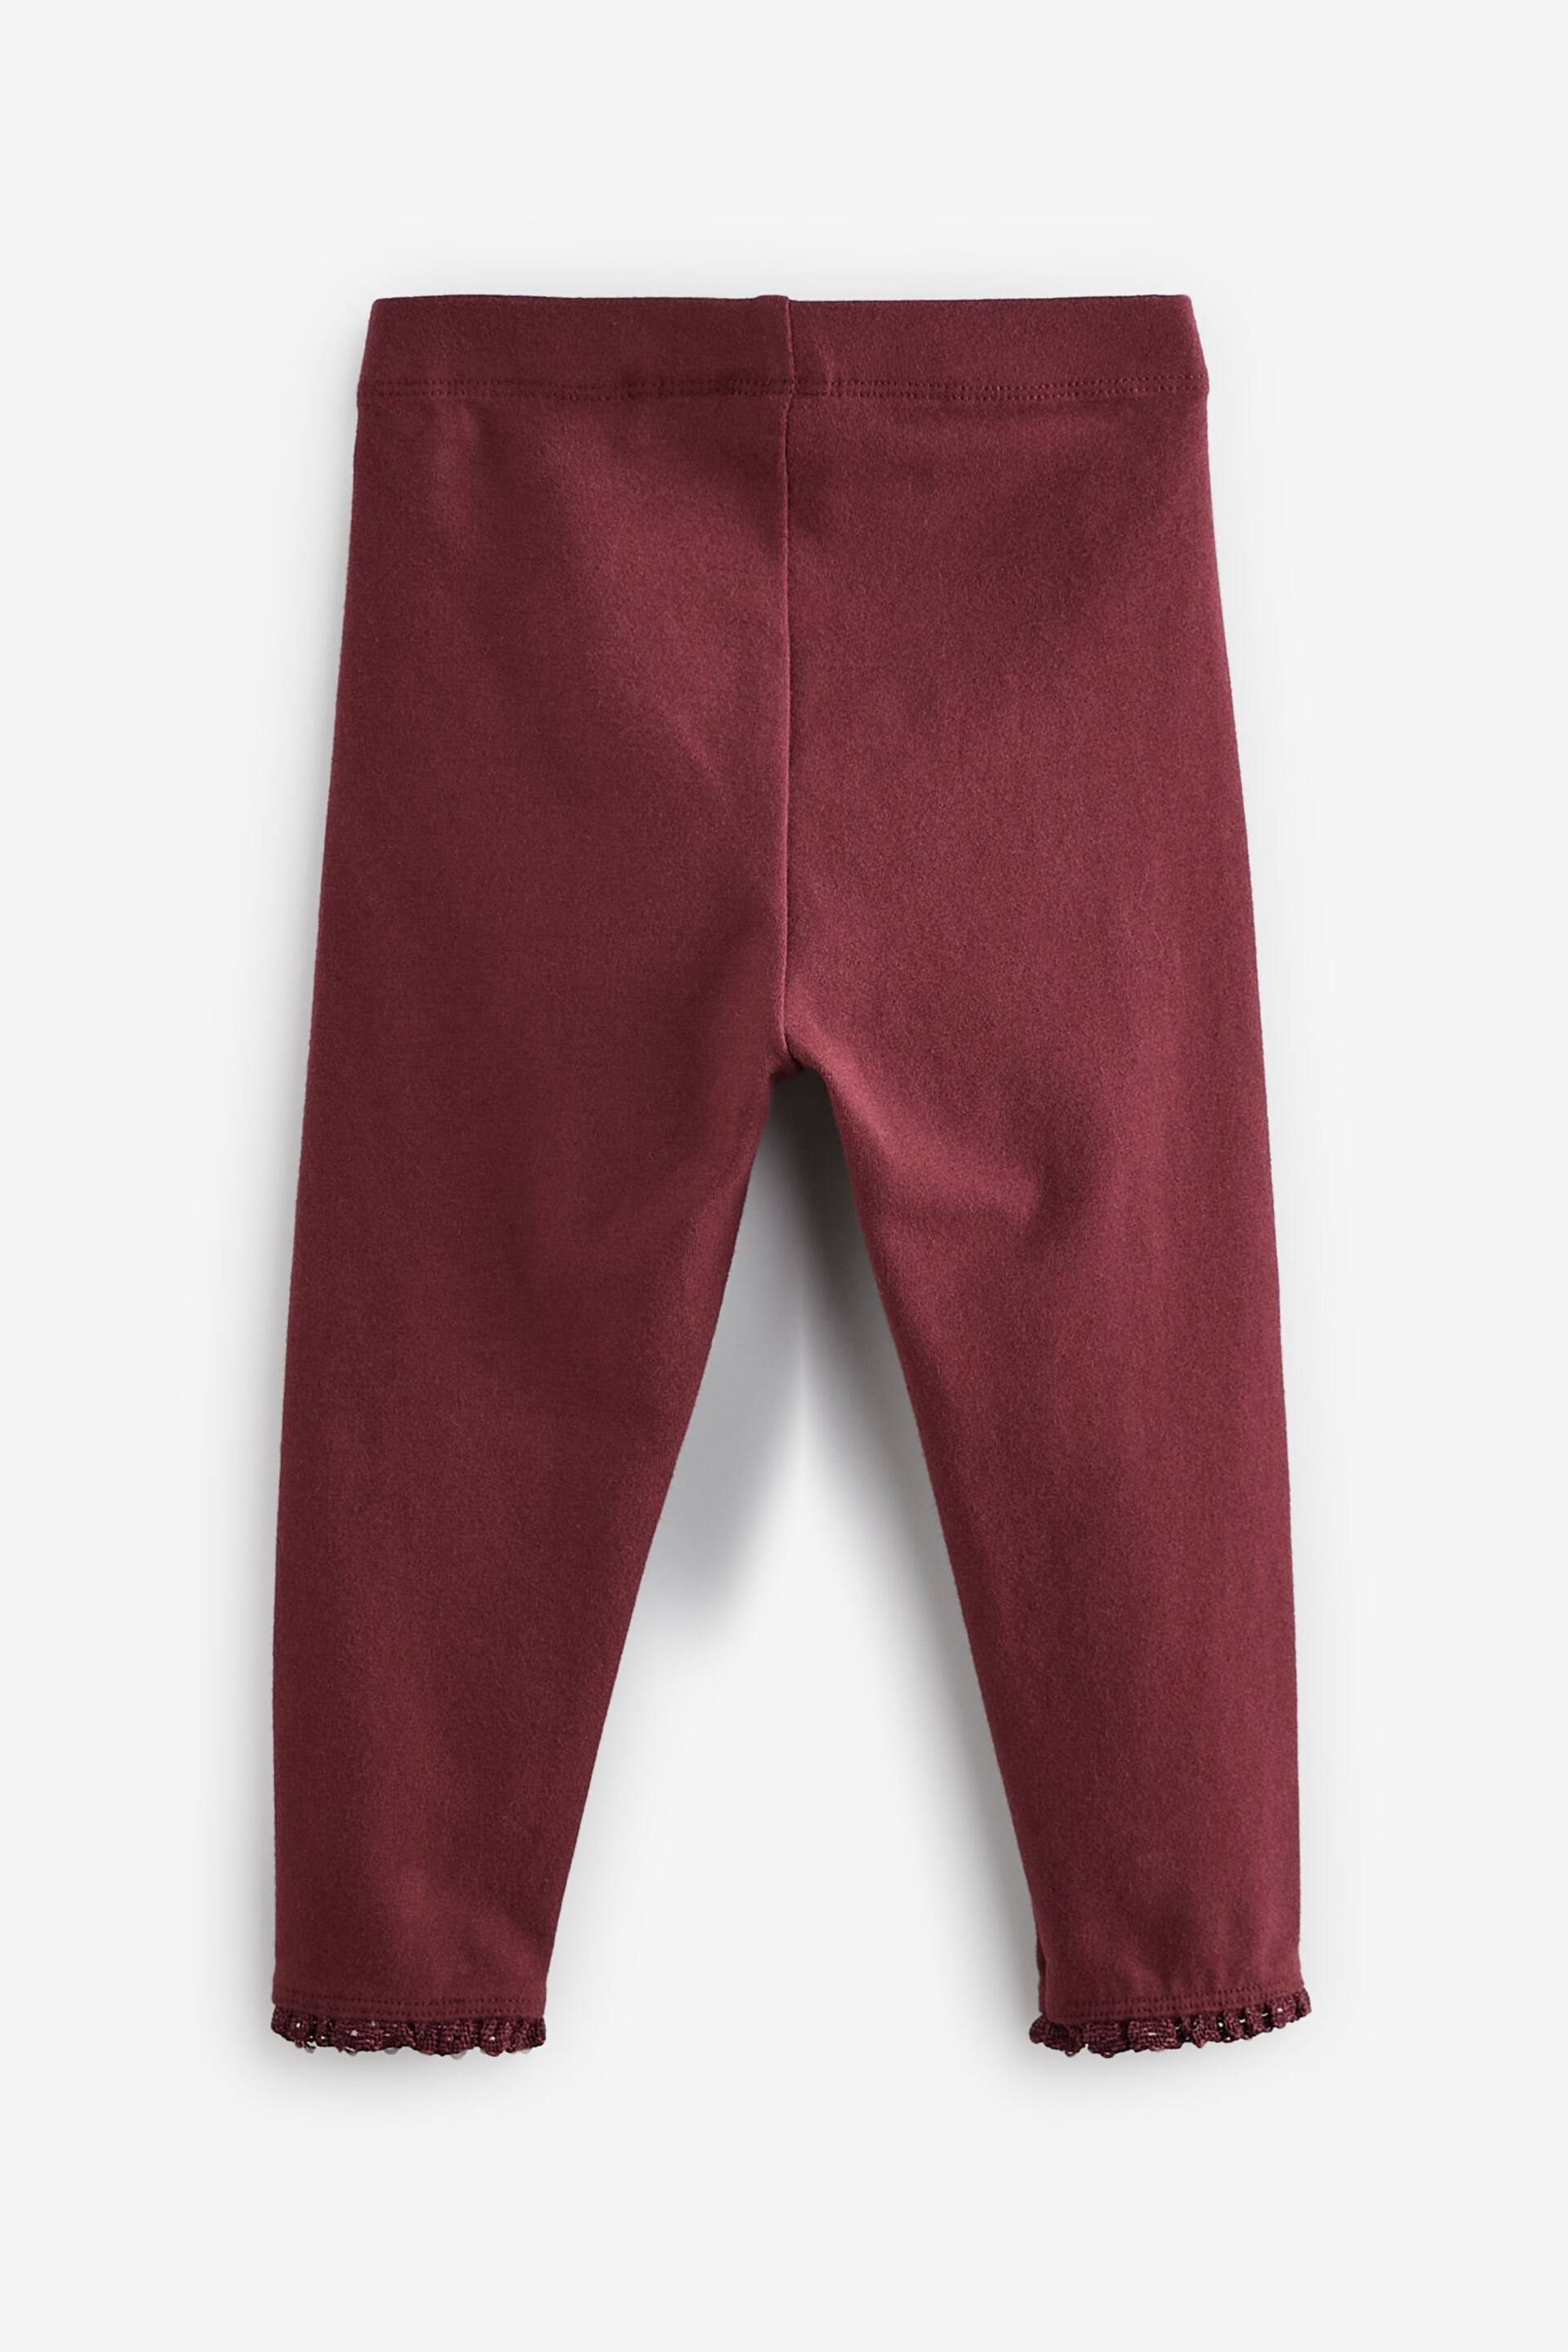 Berry Red Lace Trim Leggings (3mths-7yrs) - Image 3 of 4